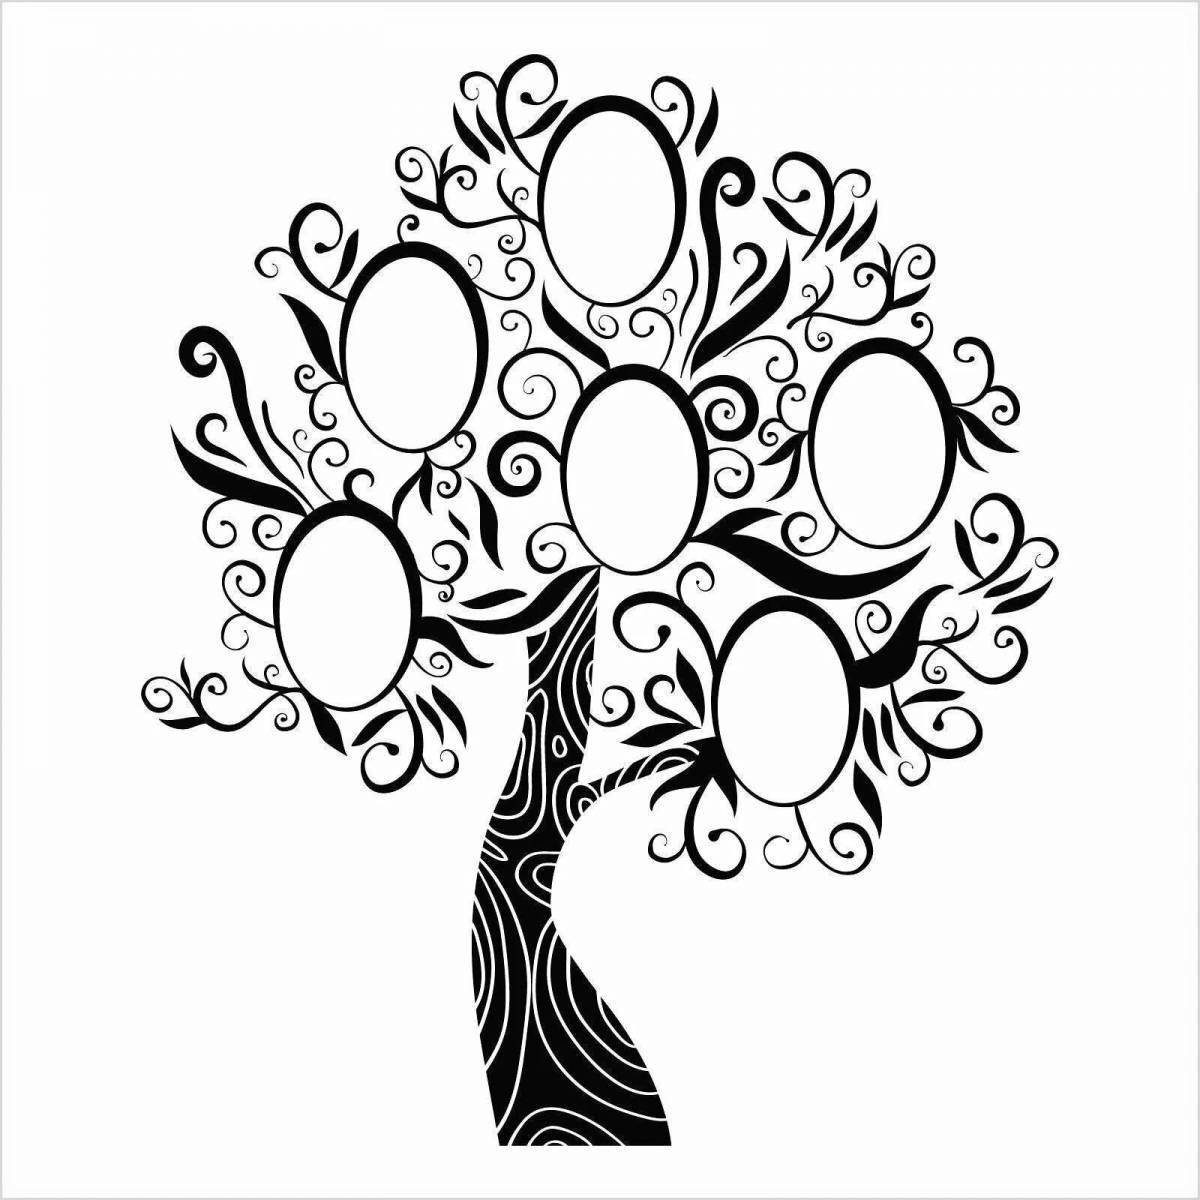 Blessed family tree coloring book